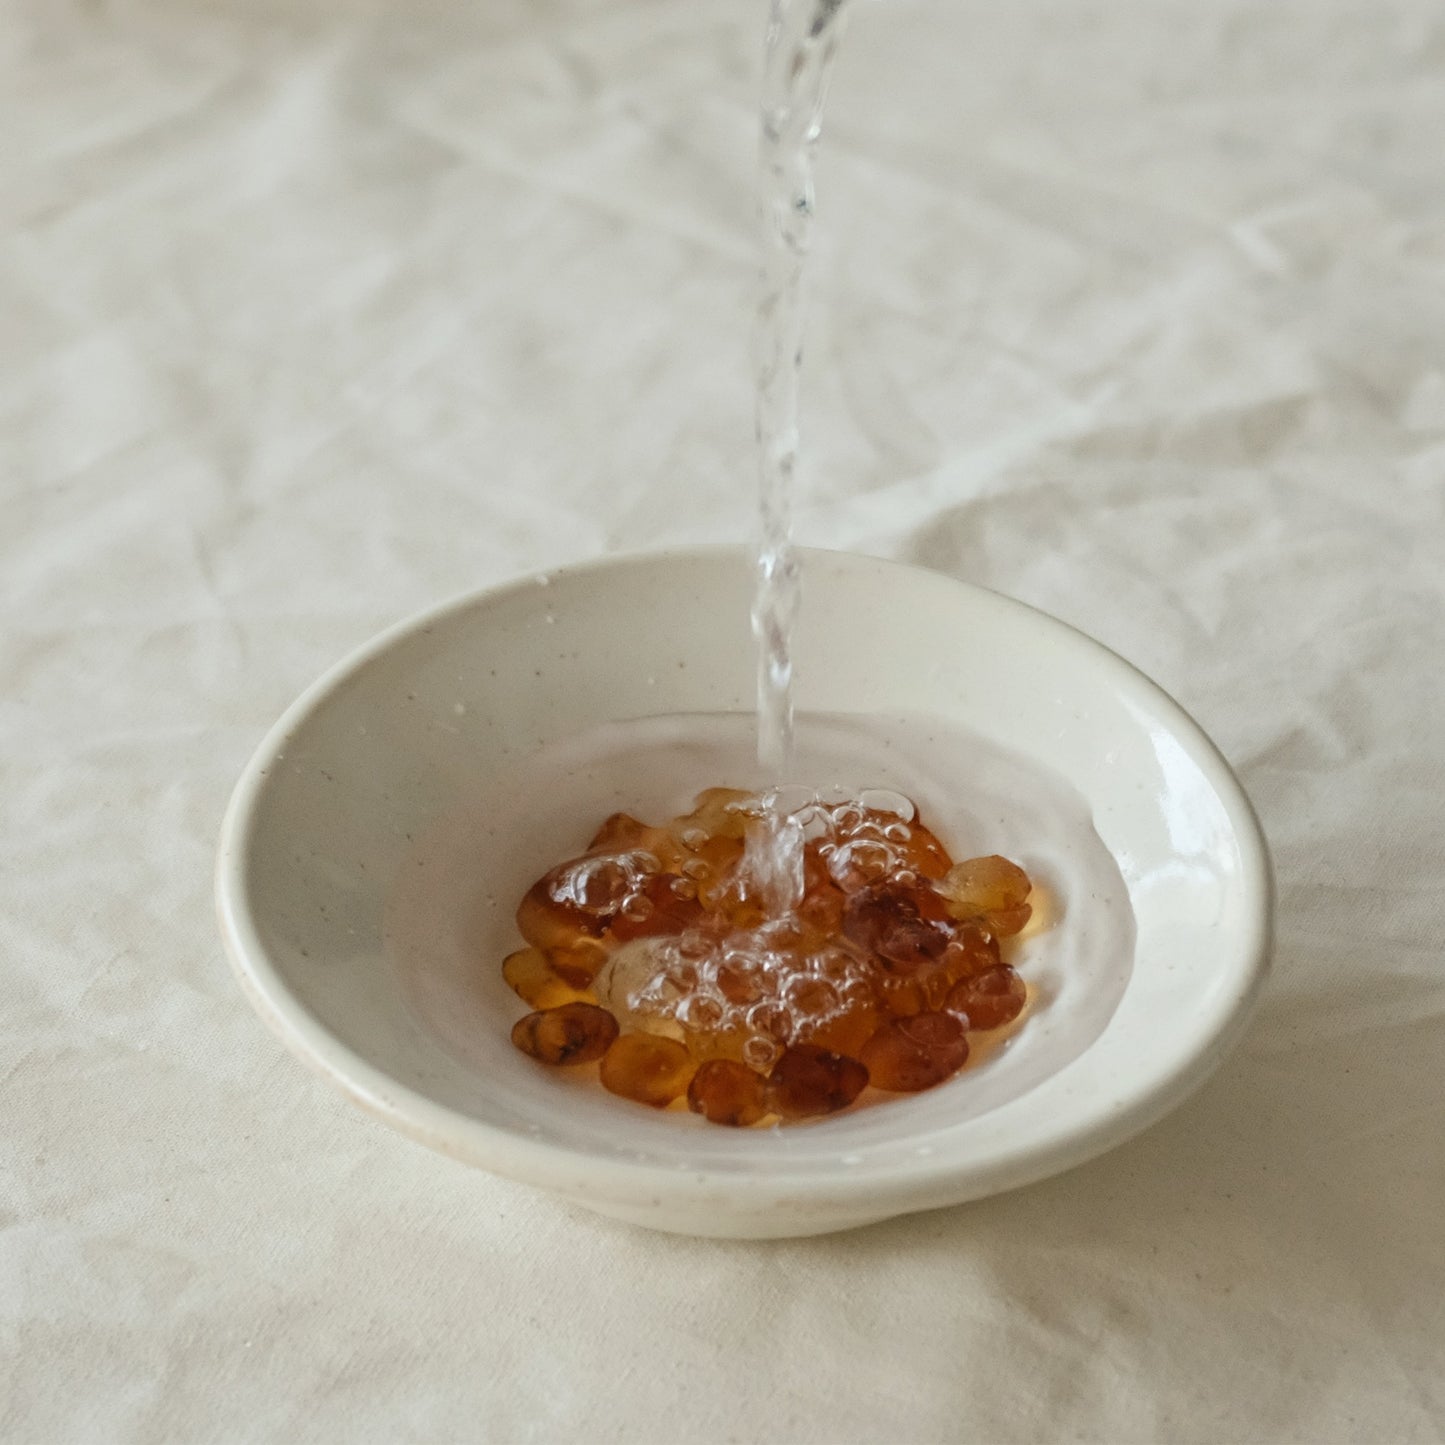 water poured over peach gum in bowl